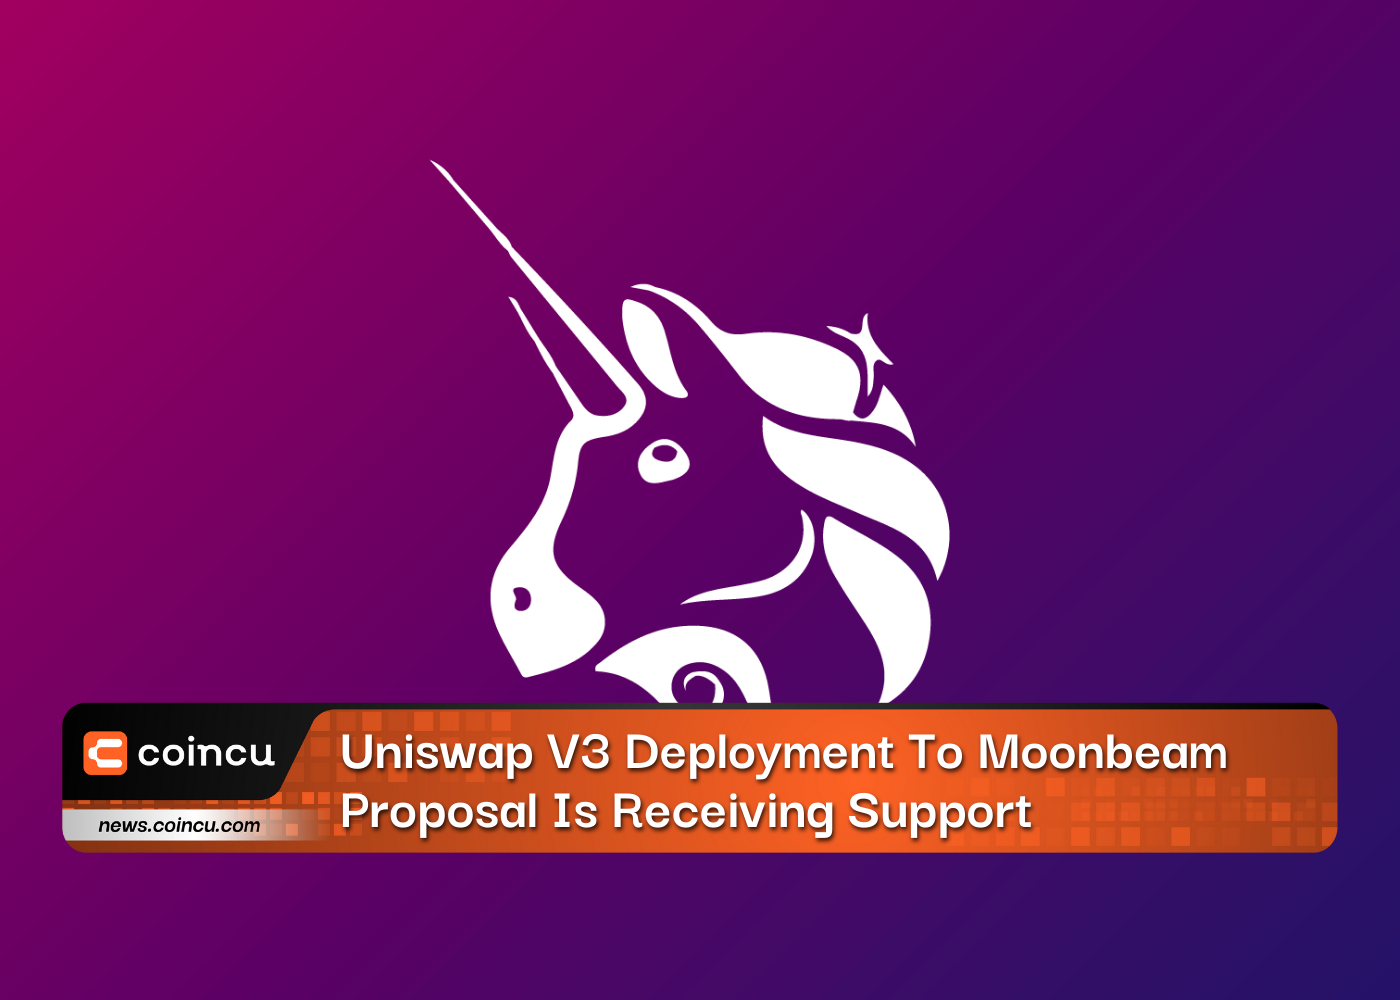 Uniswap V3 Deployment To Moonbeam Proposal Is Receiving Support